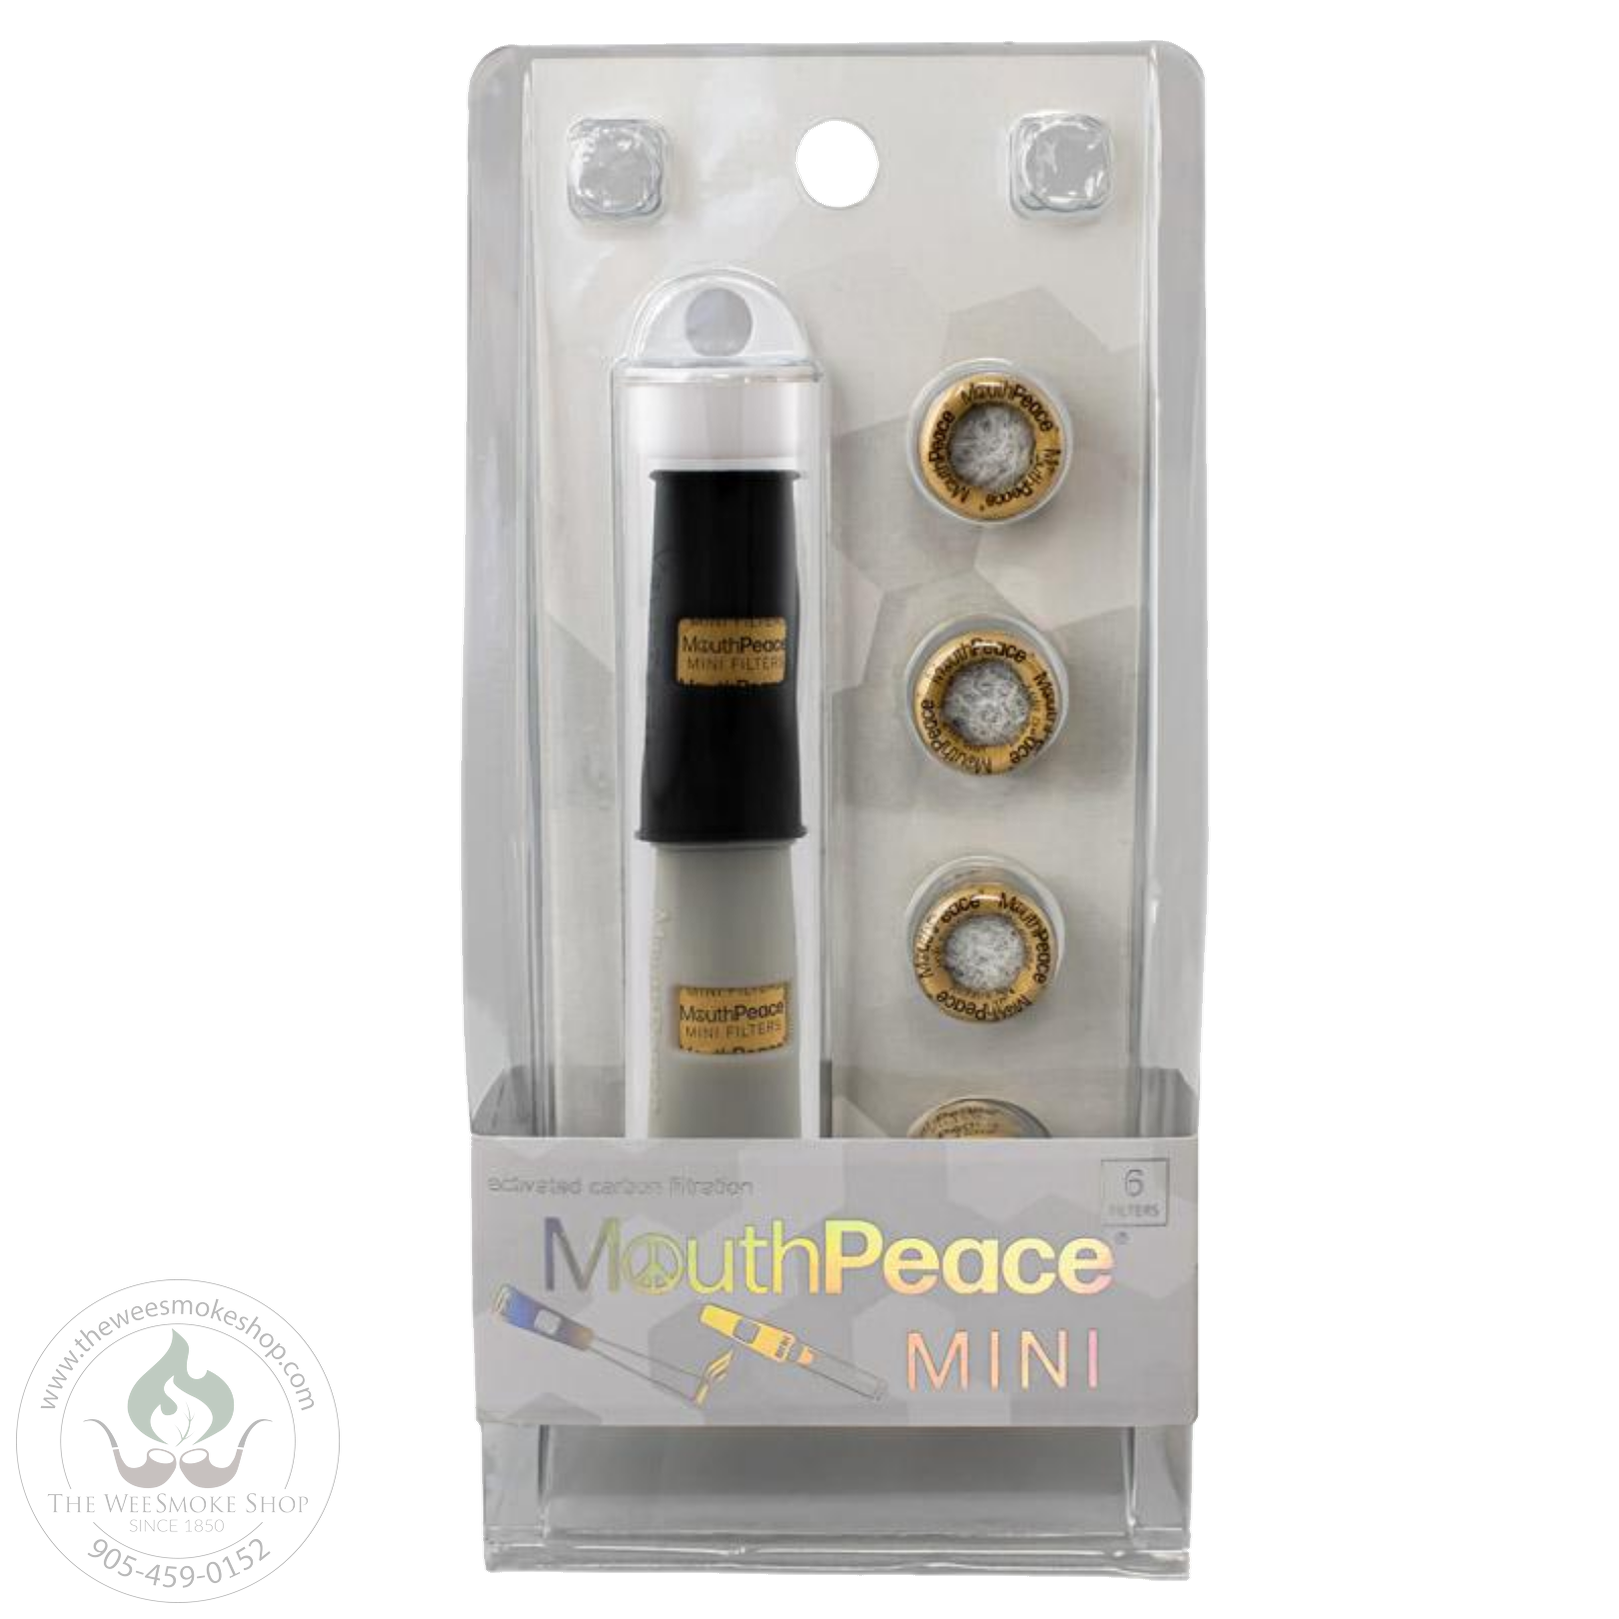 Moose Labs MouthPeace Mini in the color grey and black